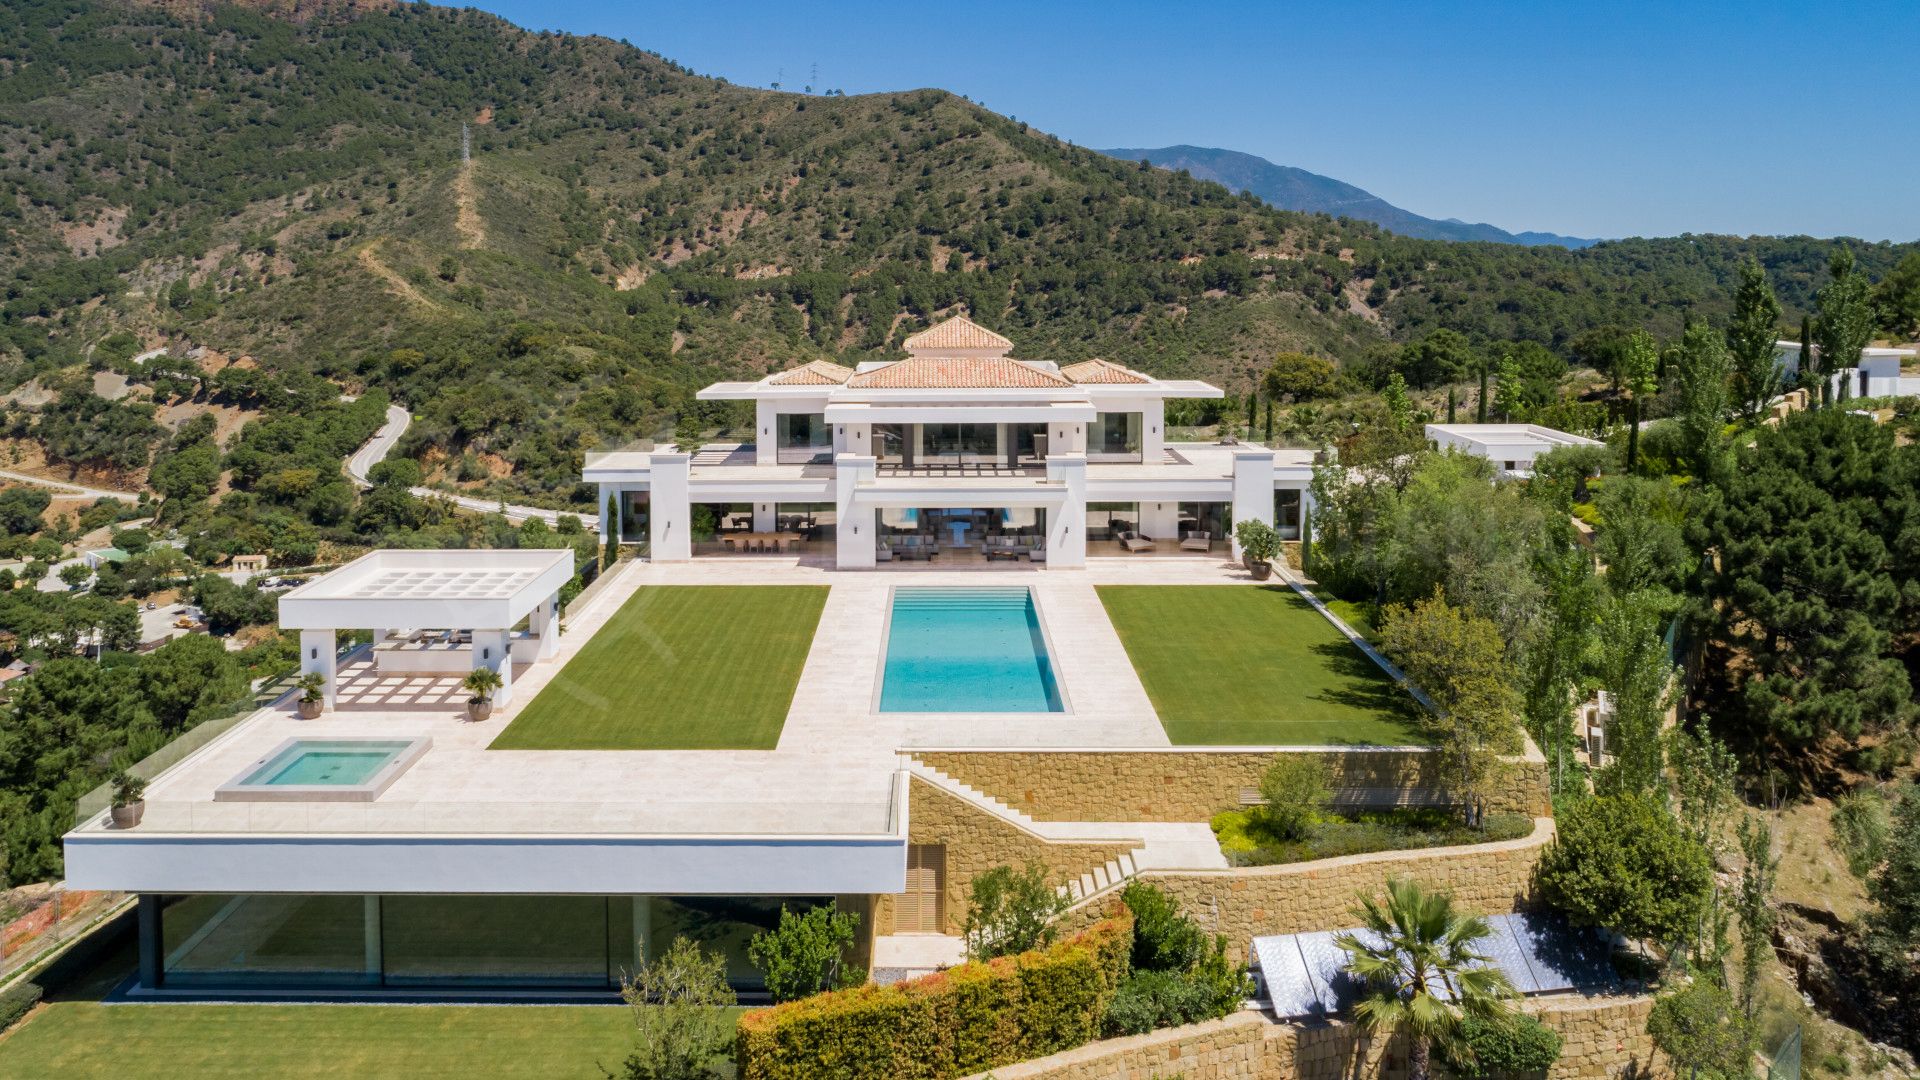 La Zagaleta leads the way in attracting high-end property investment to the Costa del Sol